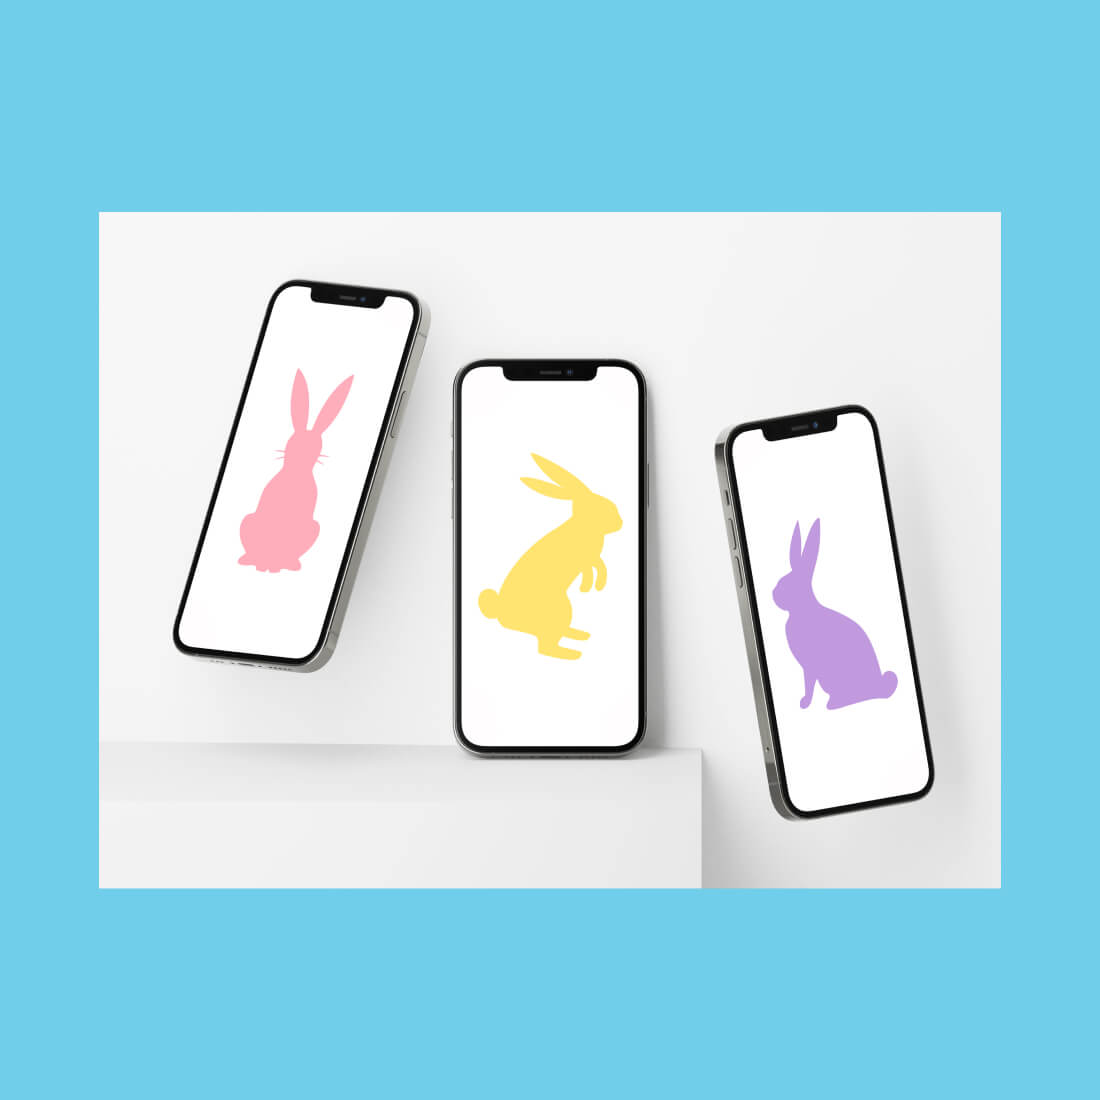 Preview FREE Bunny Silhouette SVG on the mobile phone.